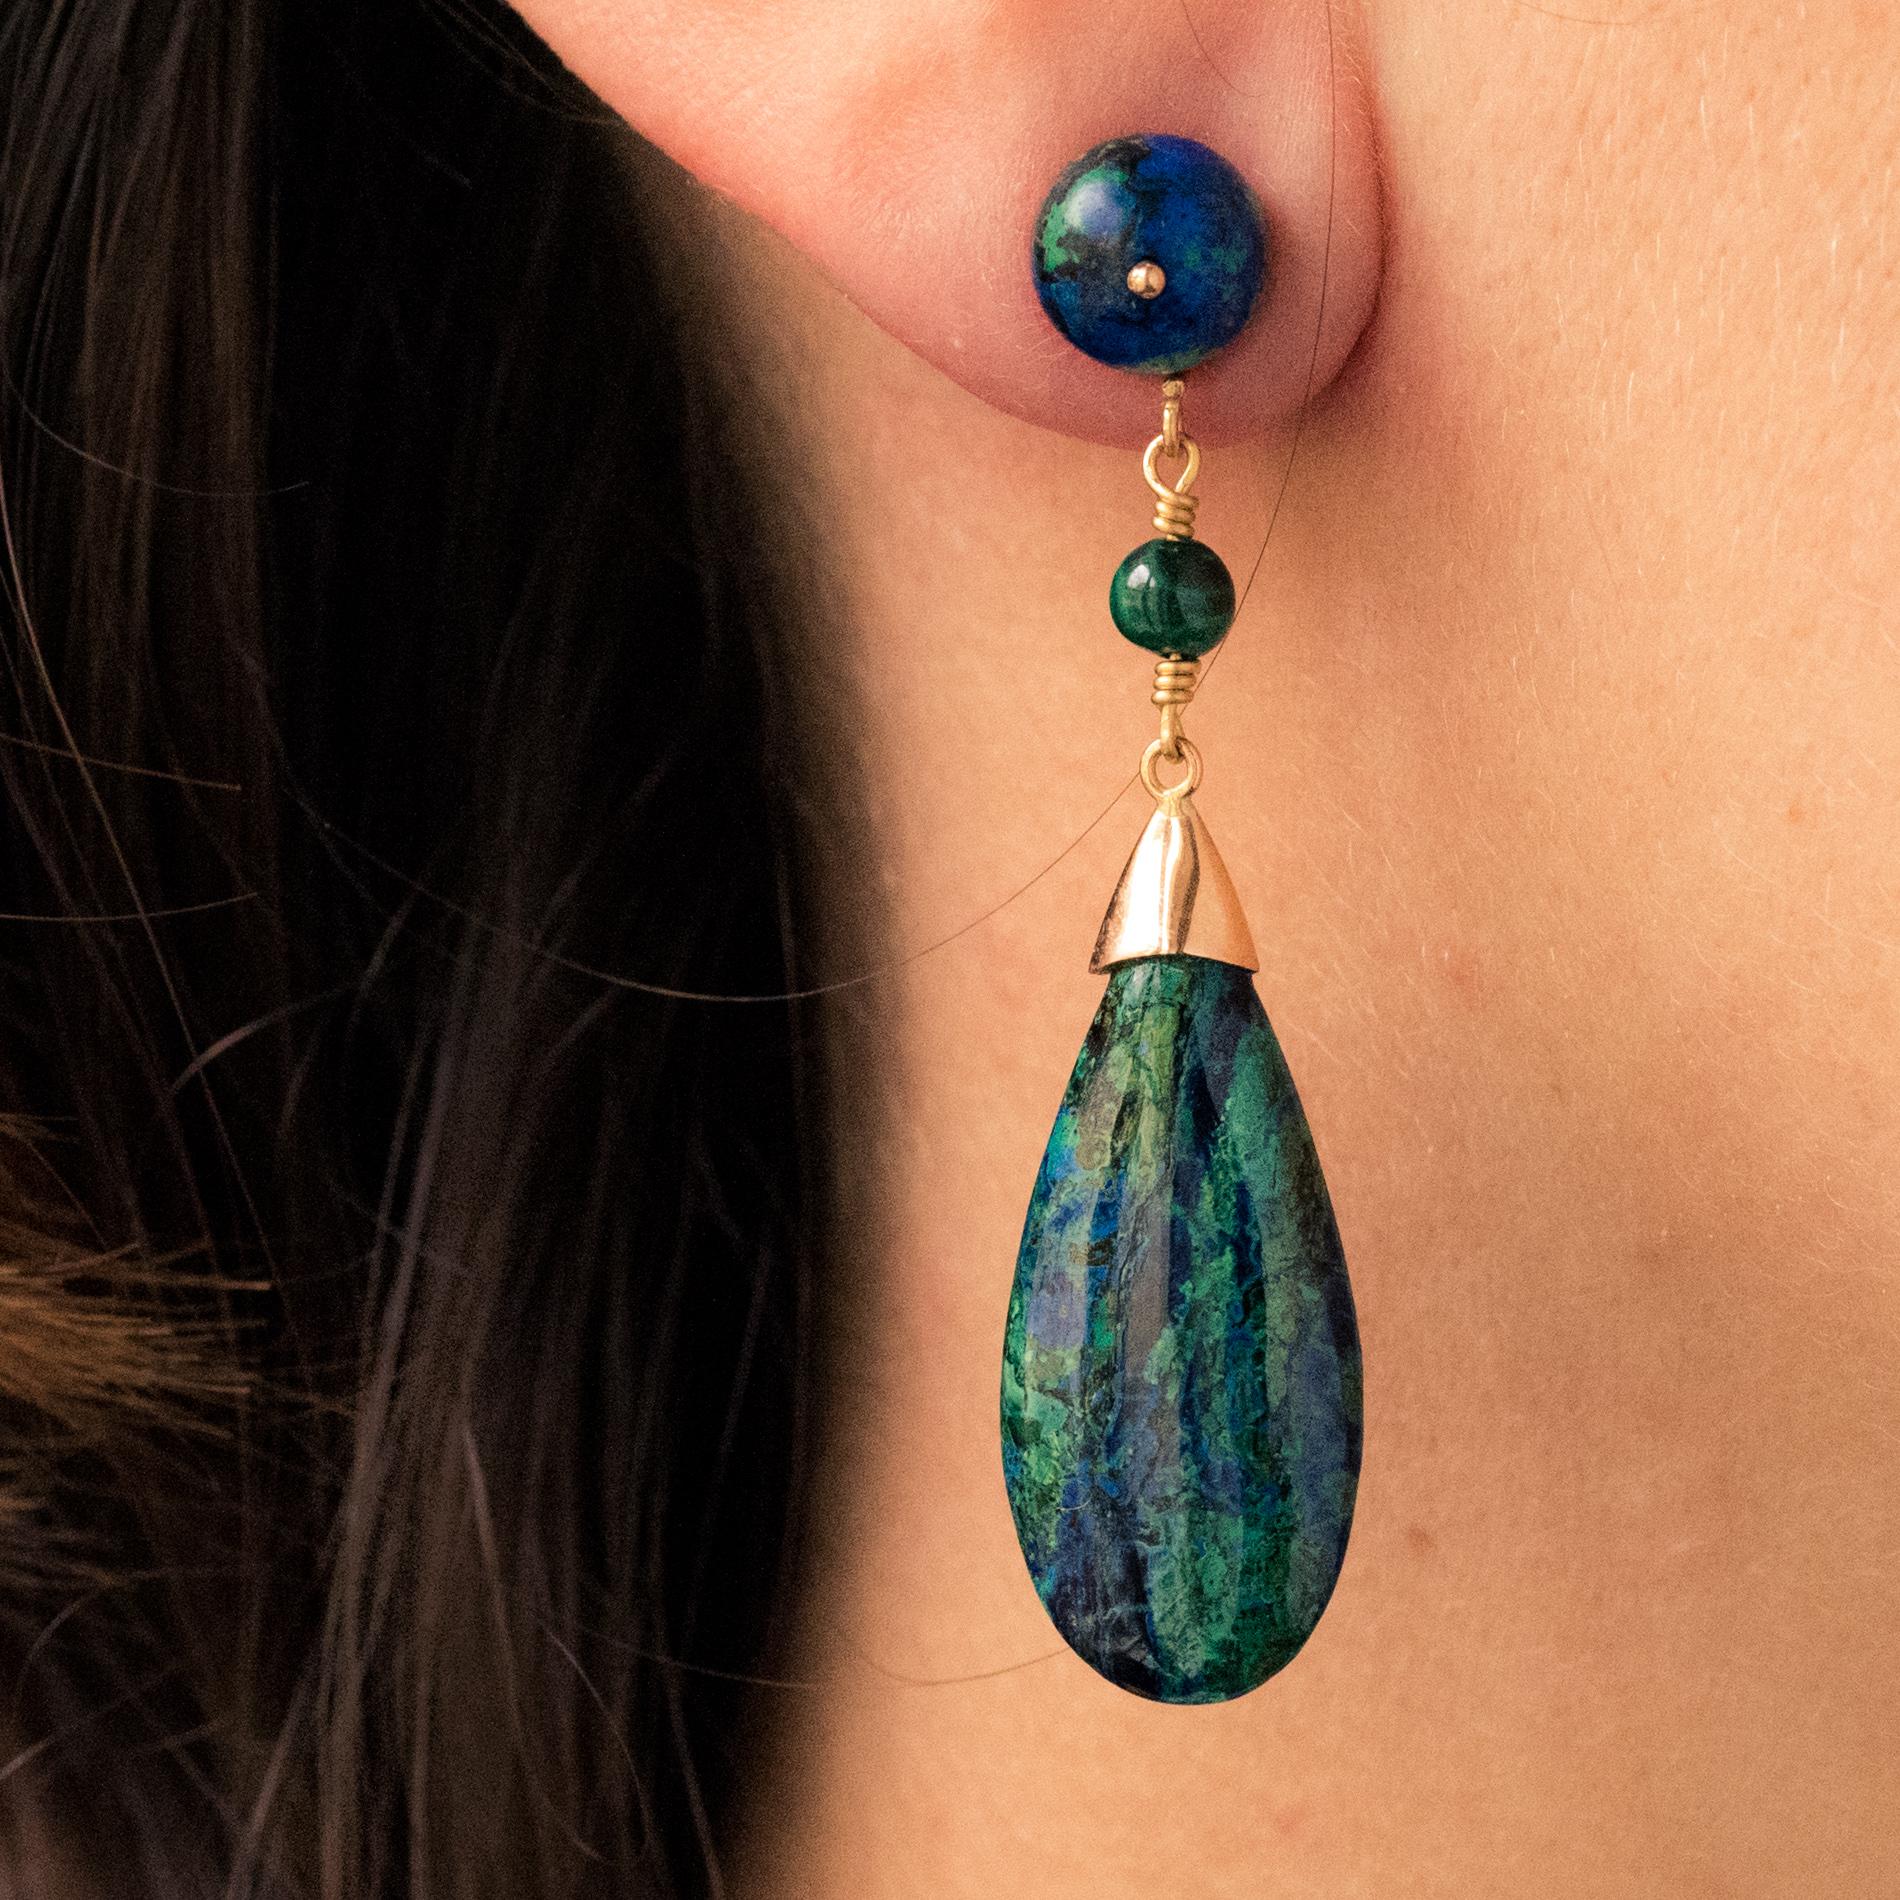 Baume Creation - Unique piece.
Earrings in 18 karat yellow gold.
Long drop earrings, each one is made of an azurmalachite pearl pierced with a gold nail which holds a malachite pearl in the pendulum, itself supporting a flat drop of azurmalachite.